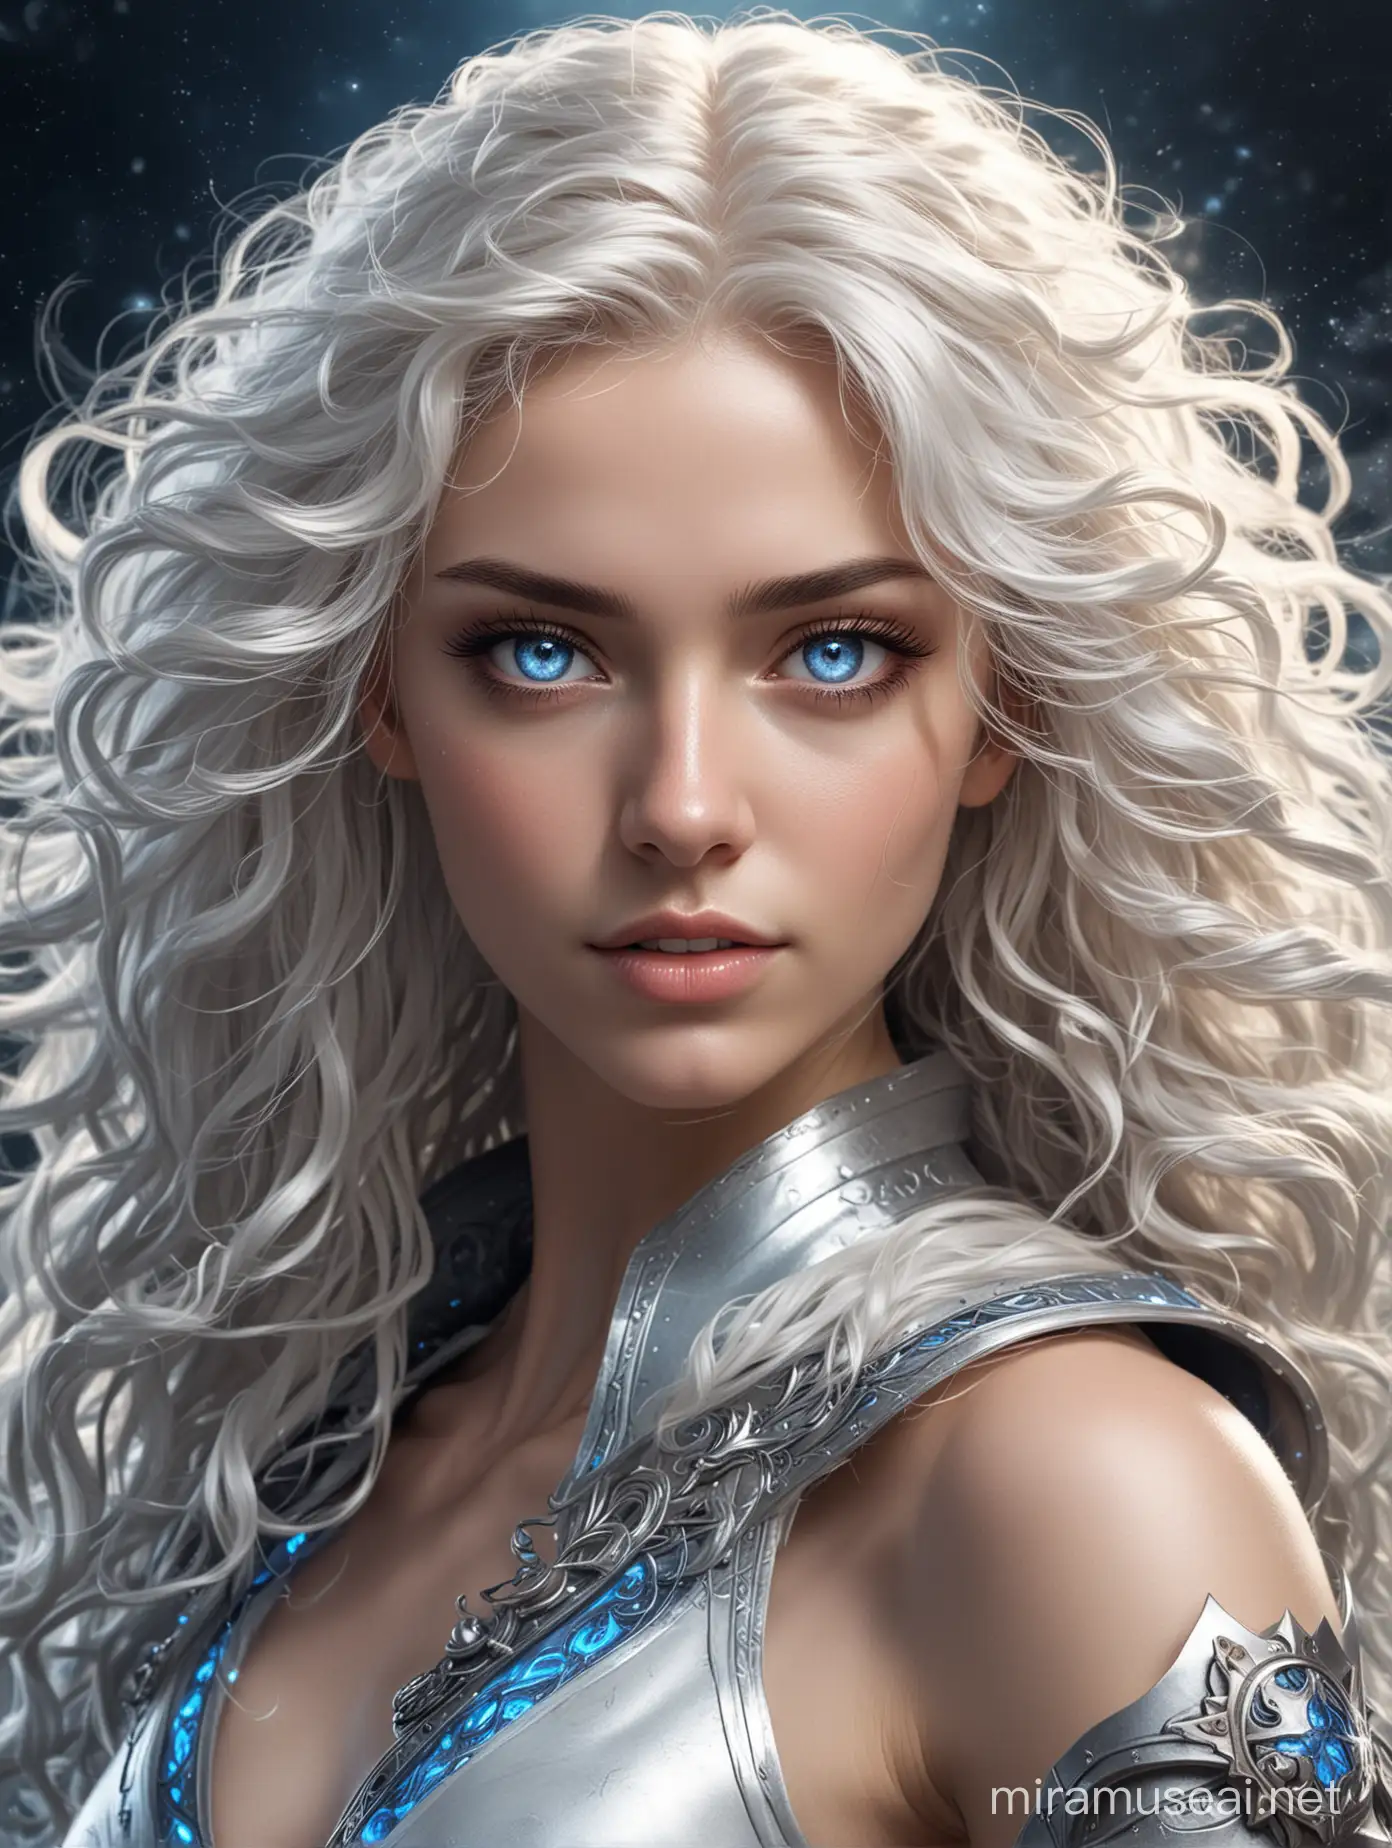 Female celestial being fighter. Long curly white hair. Glowing blue eyes. Radiant skin